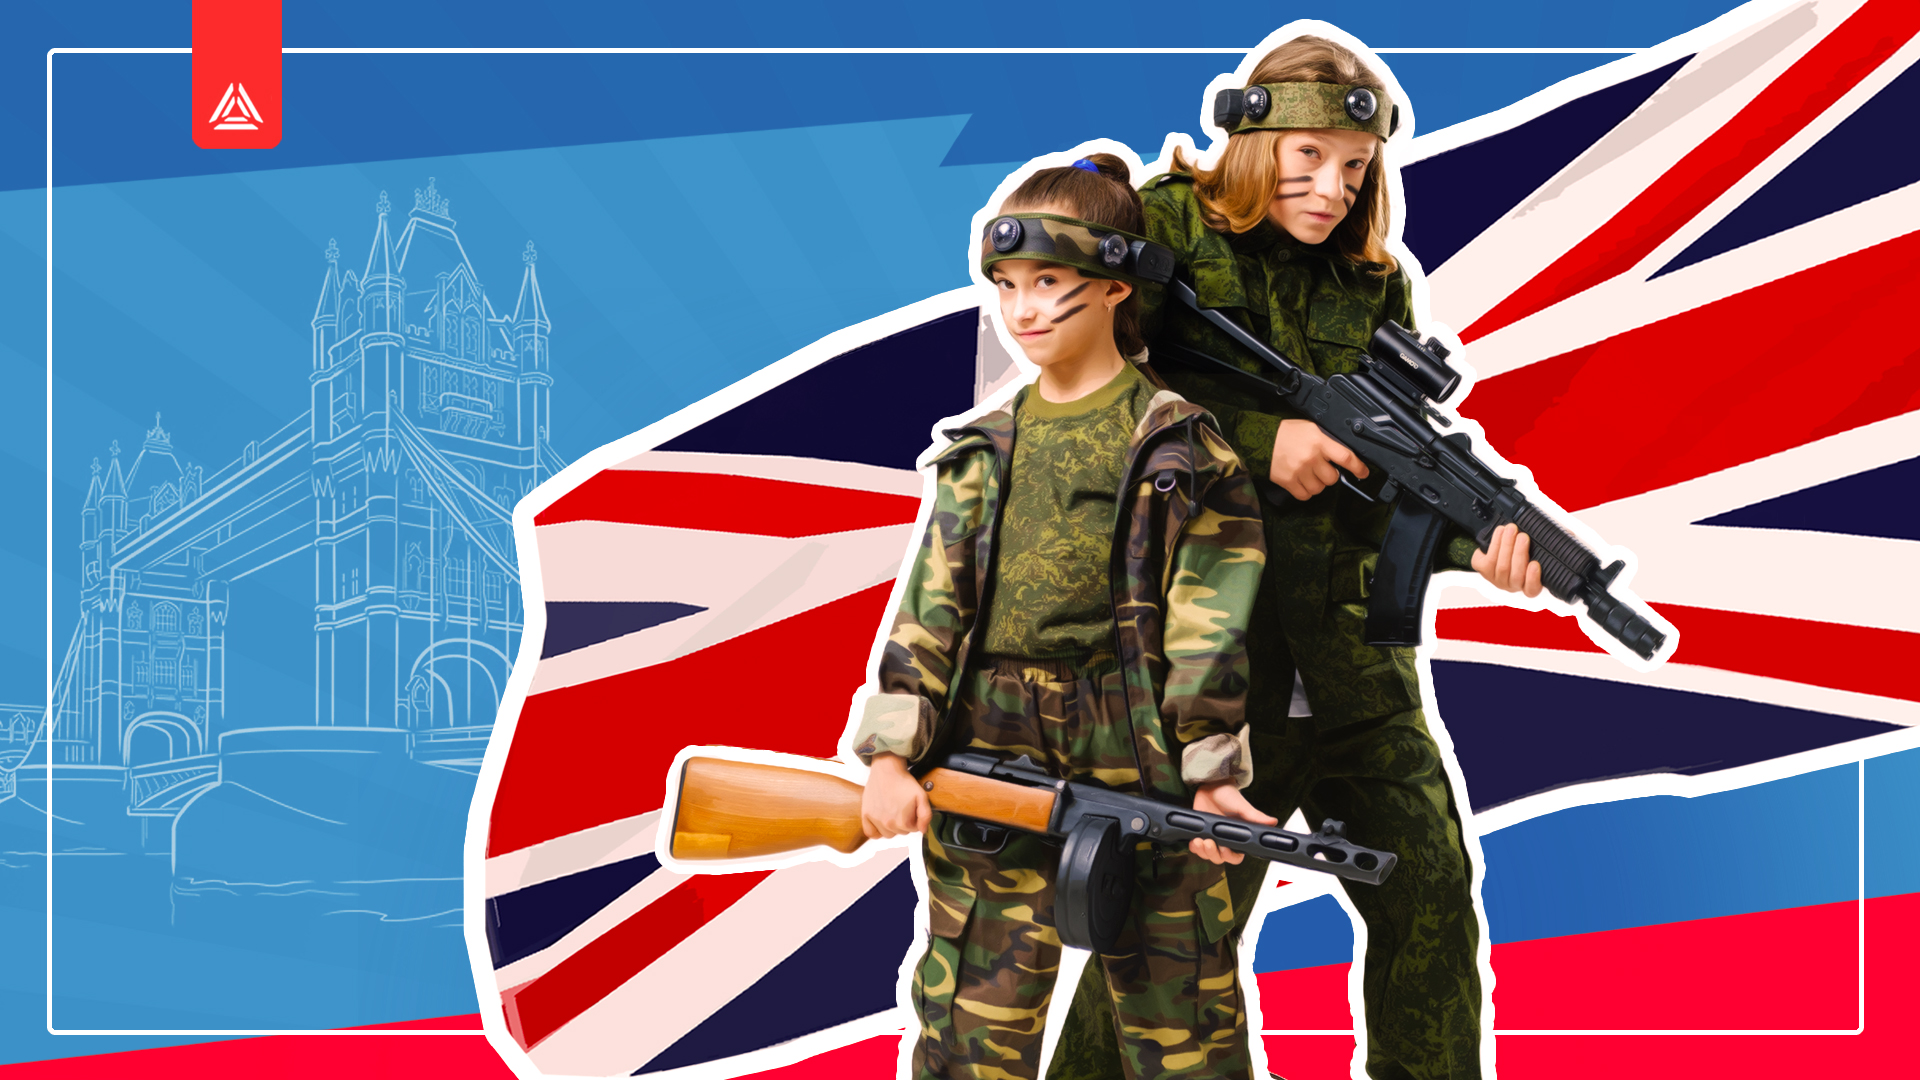 The first sports laser tag school was opened in Great Britain